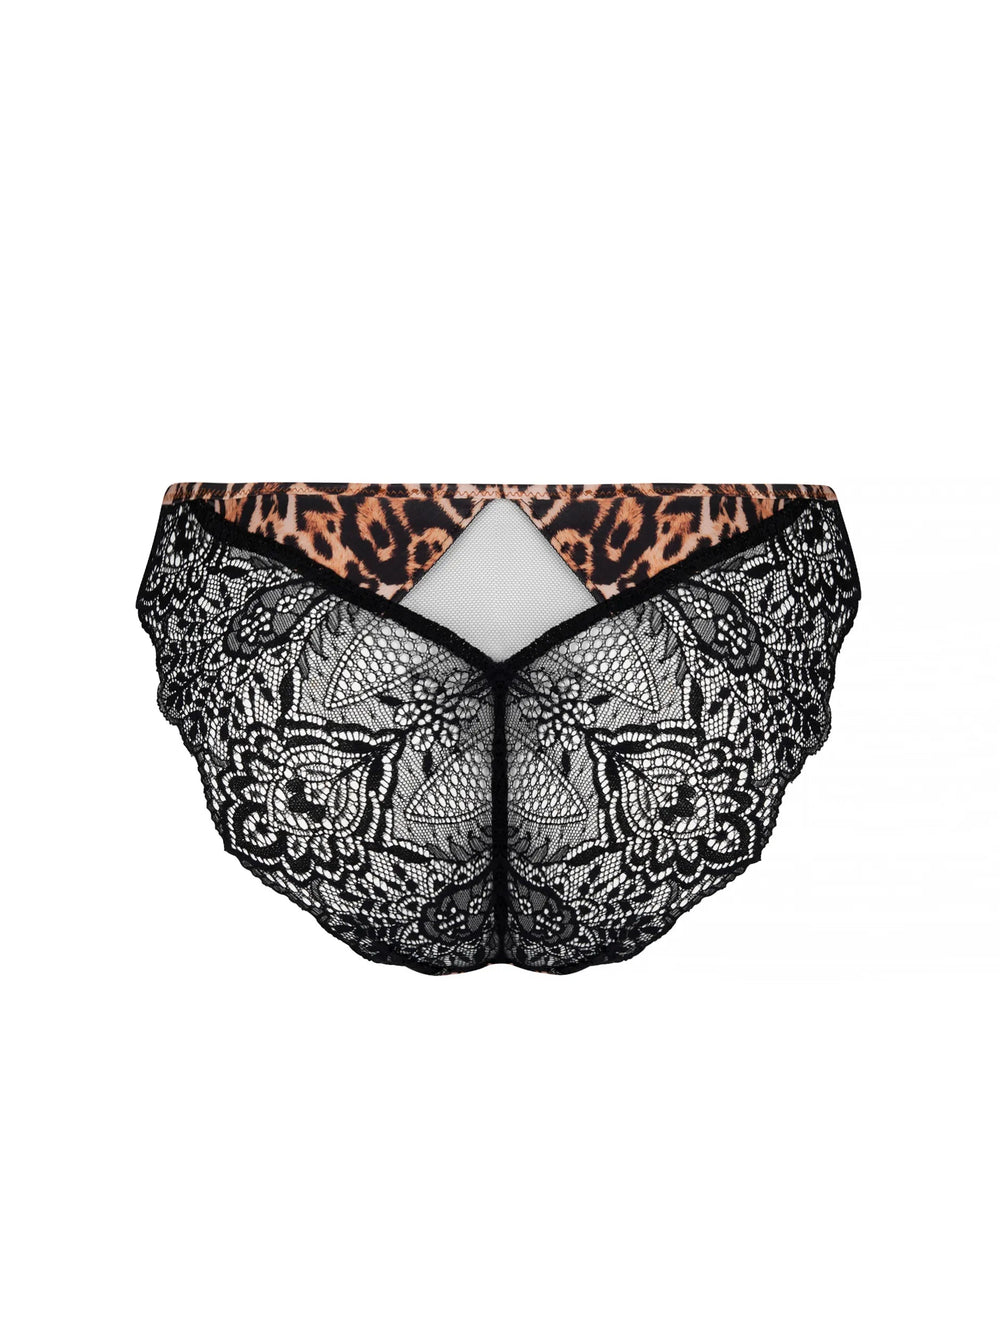 Lise Charmel - Fauve Amour Italian Brief Ambre Panthere Brief Lise Charmel 